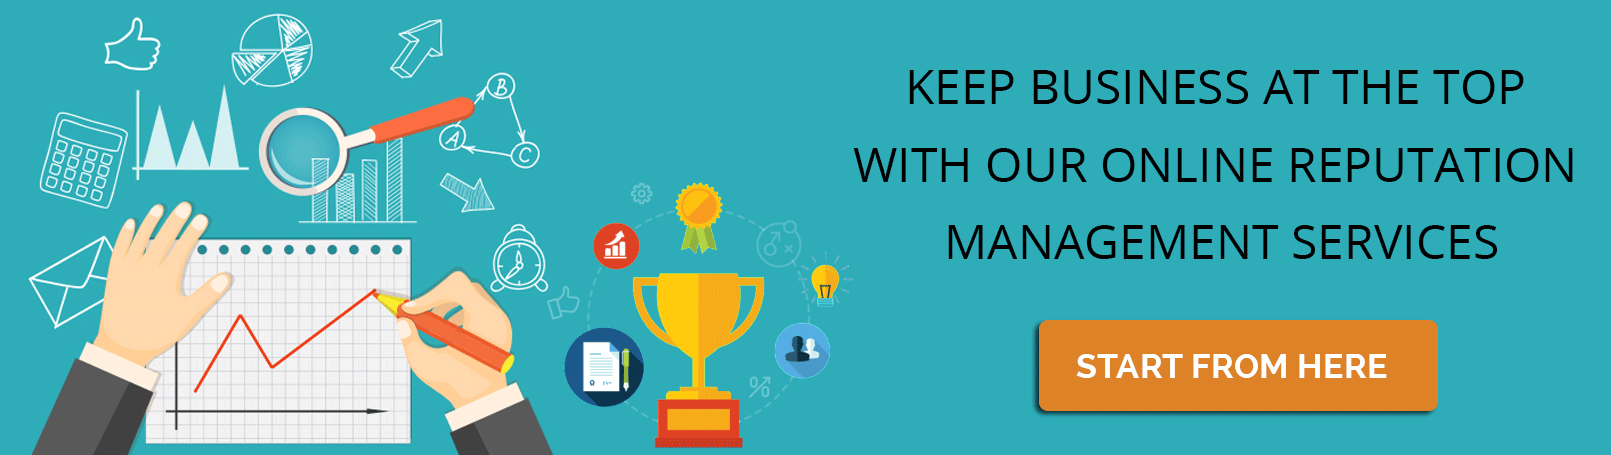 Keep business at the top with our online reputation management services